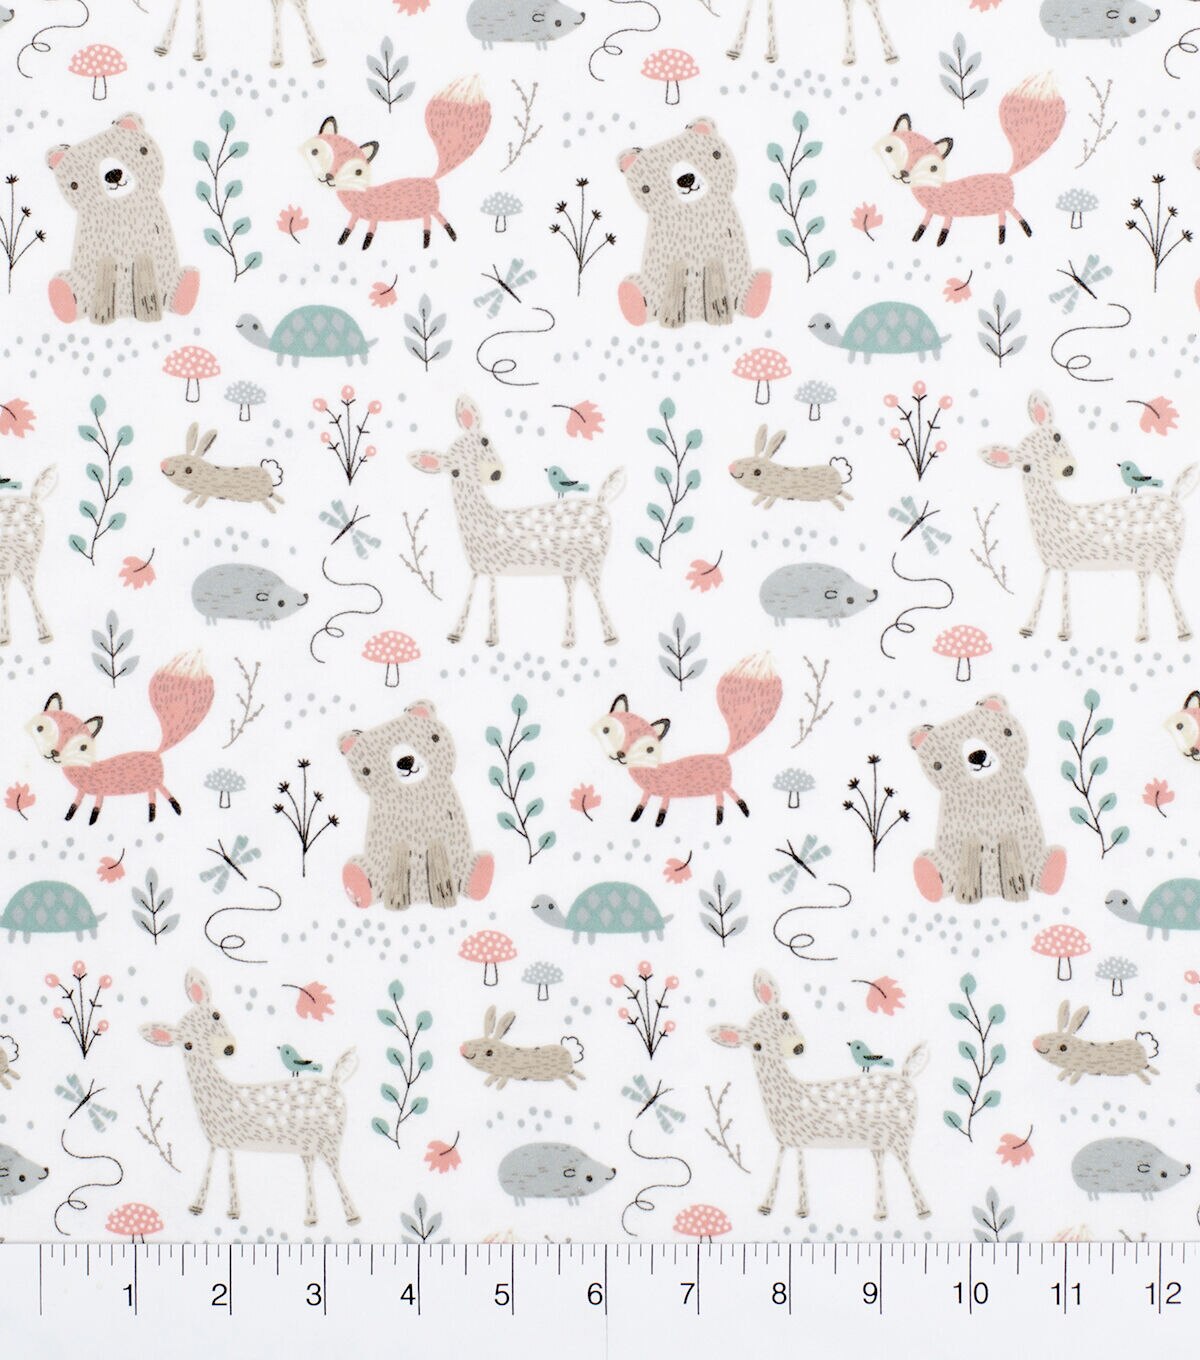 Woodland Creatures Fabric Watercolor Woodland Nursery Cotton Fabric By The Yard With Spoonflower Woodland Creatures White By Vinpauld